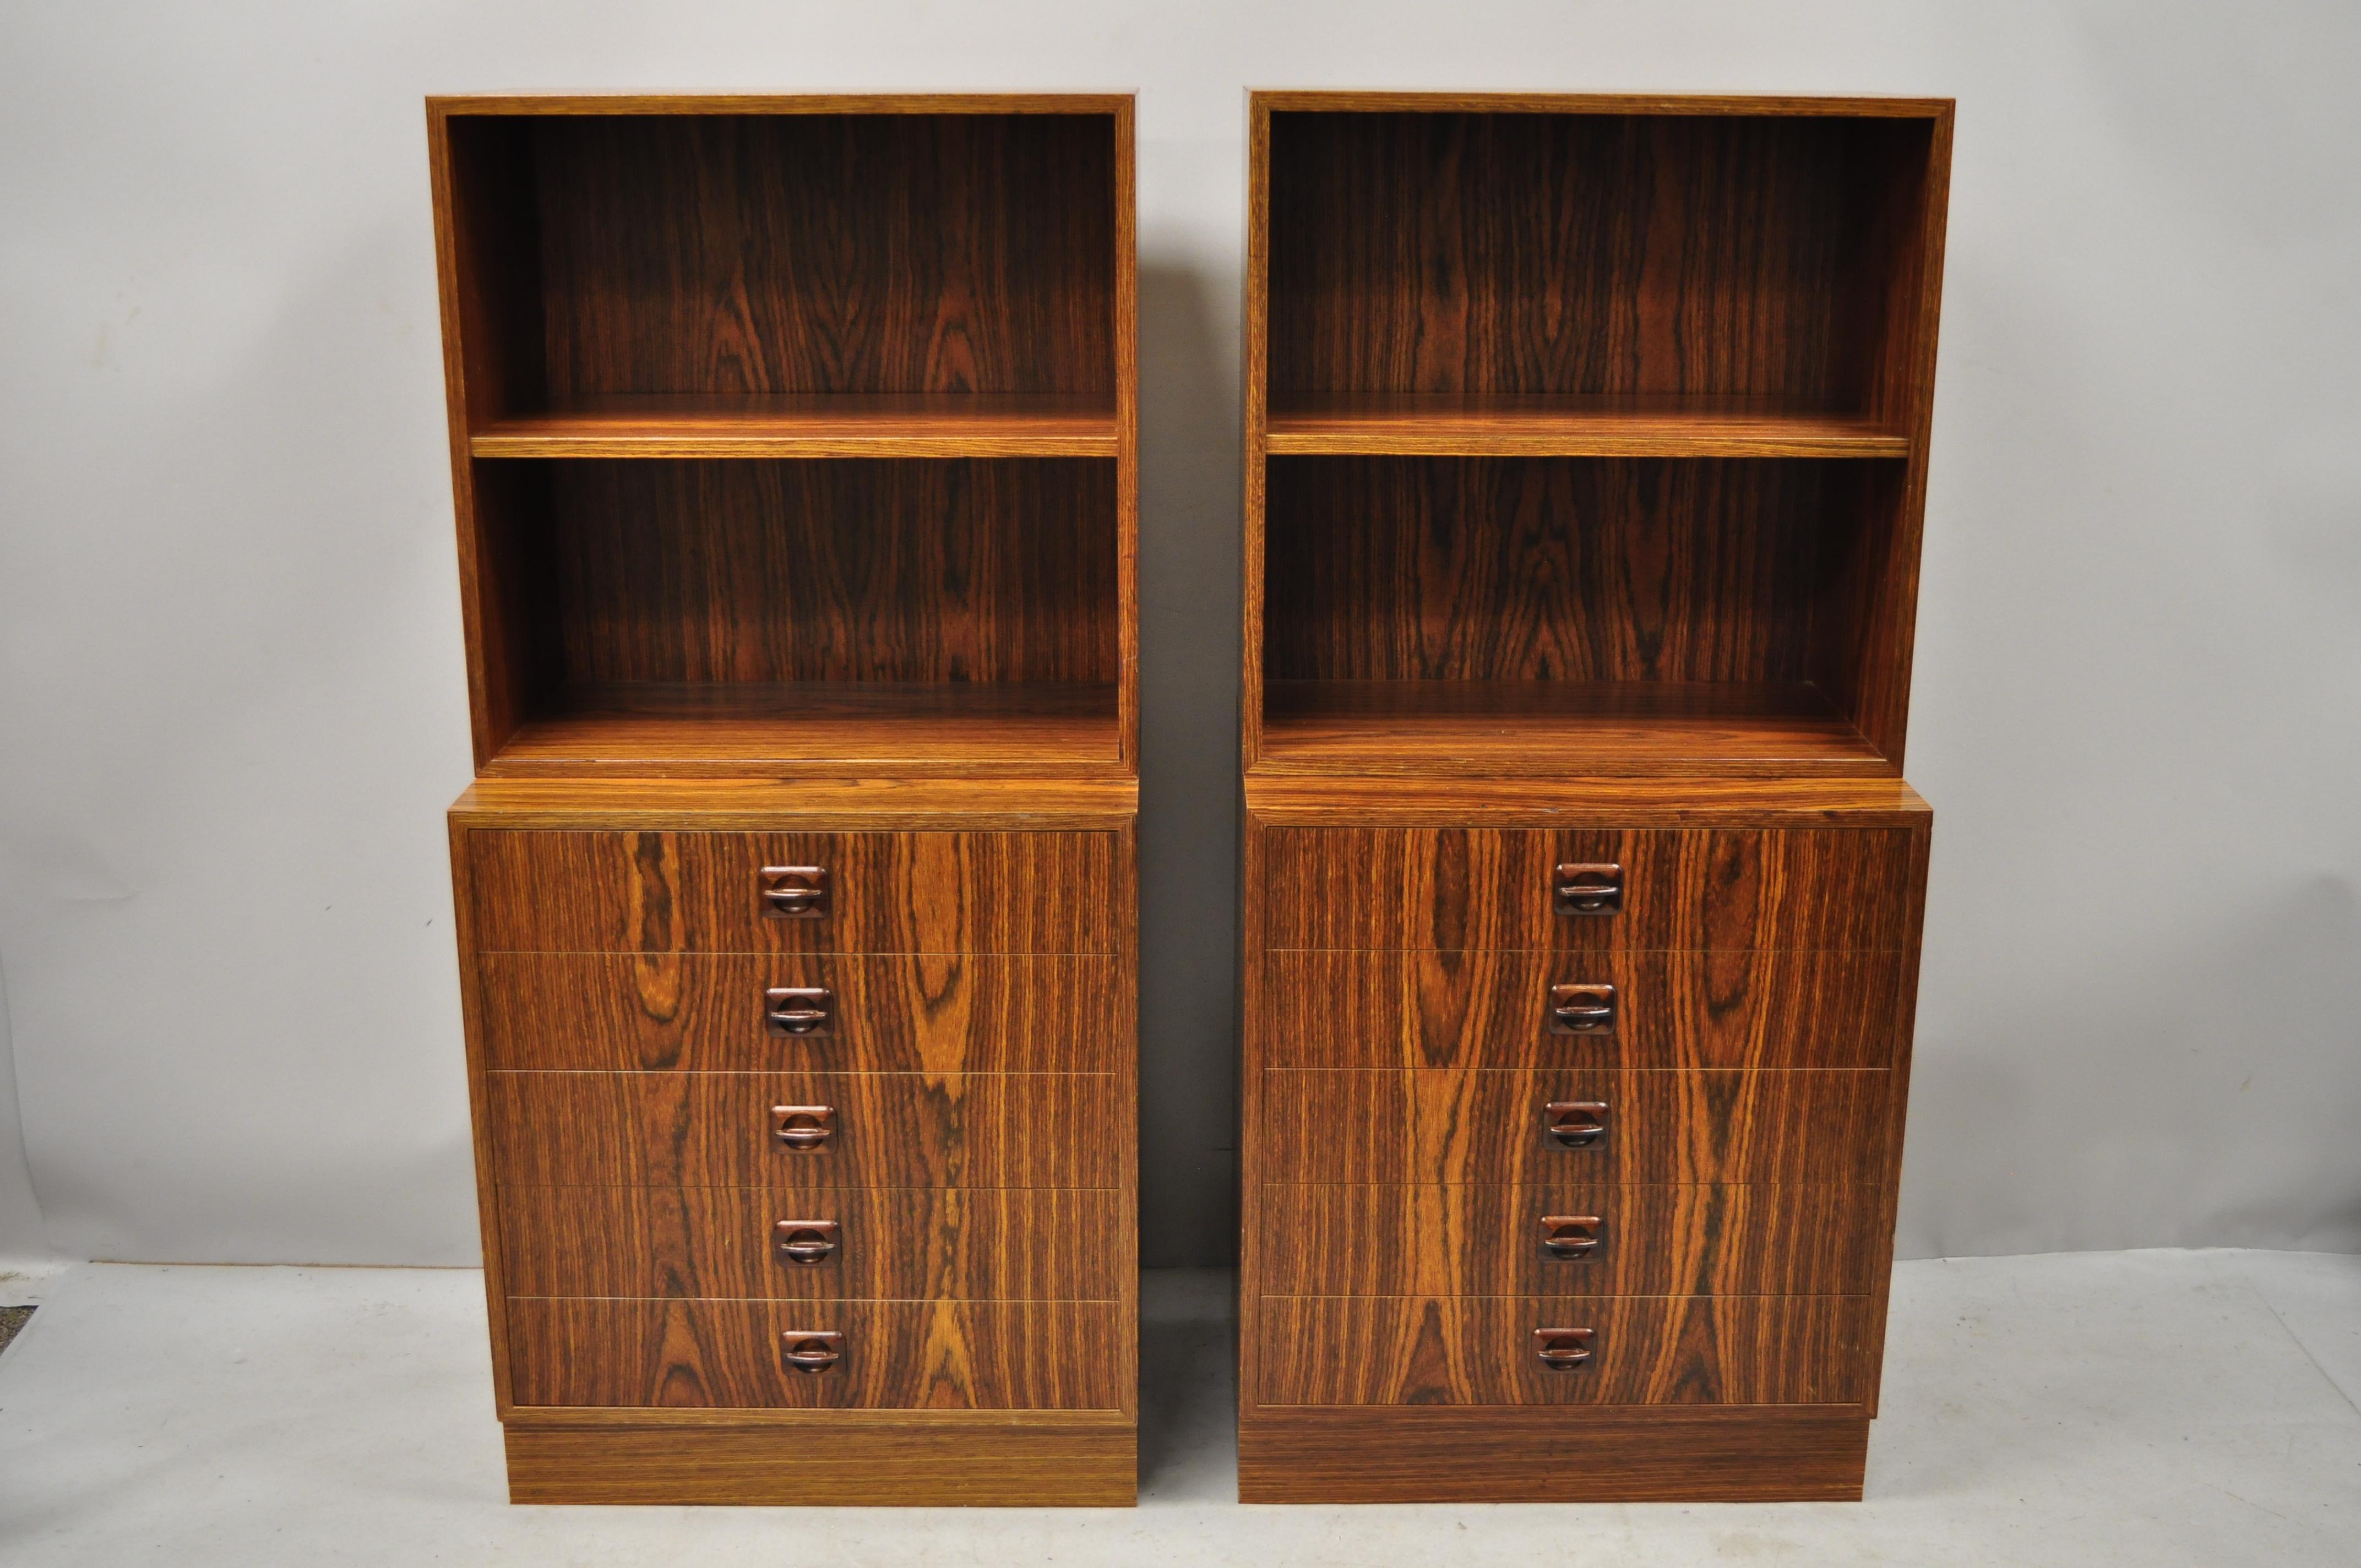 Pair of small midcentury Danish modern rosewood modular bookcase chest display shelves. Item features a nice small size, sculpted rosewood pulls, beautiful wood grain, 5 drawers, 1 adjustable shelf, clean modernist lines, great style and form, circa